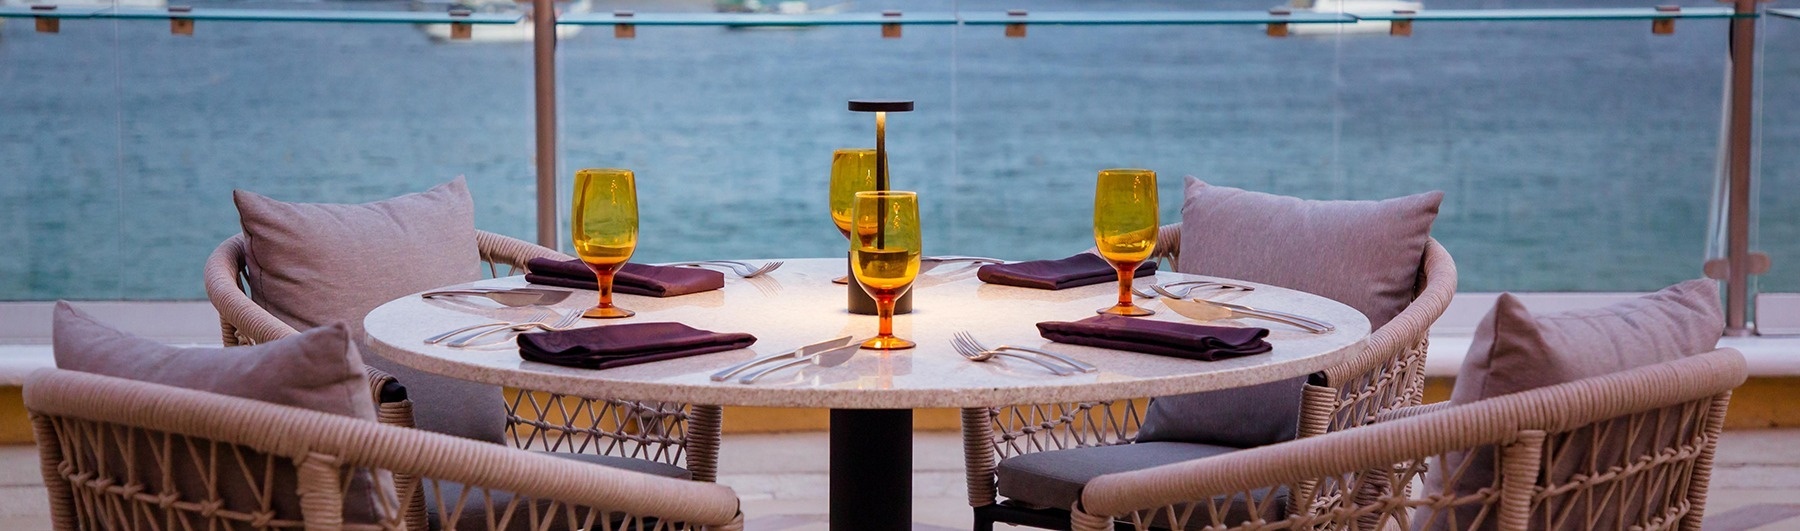 a table set for a meal with a view of the ocean